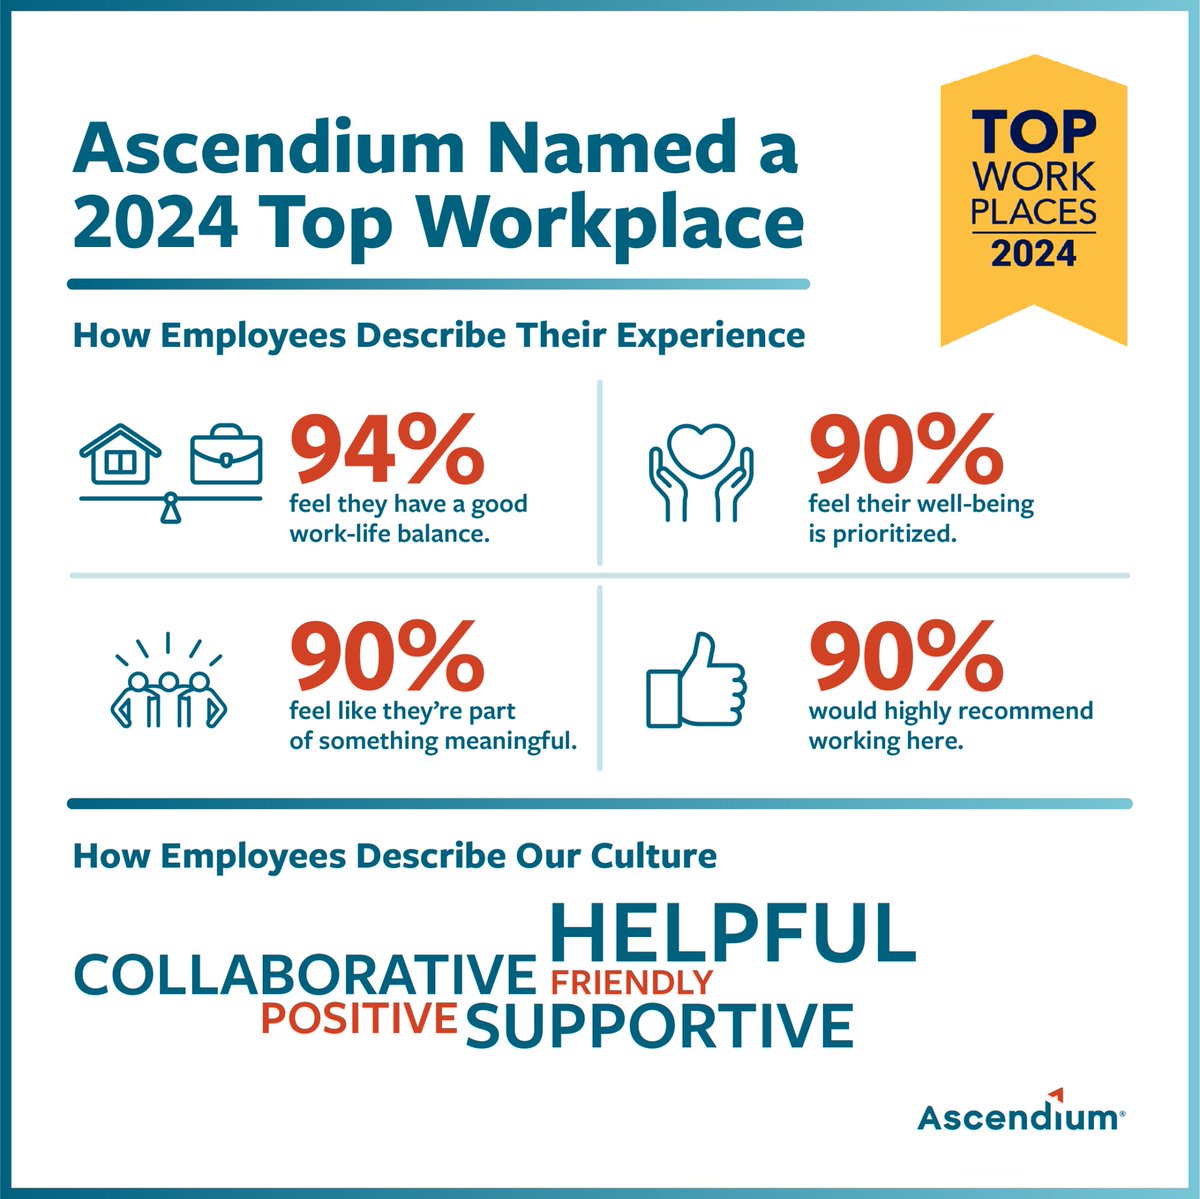 94% of employees at #AscendiumEd feel they have a good work-life balance, and 90% feel like they’re part of something meaningful. Check out these and more #TopWorkplace results to learn how our employees view working at Ascendium. #AscendiumLife